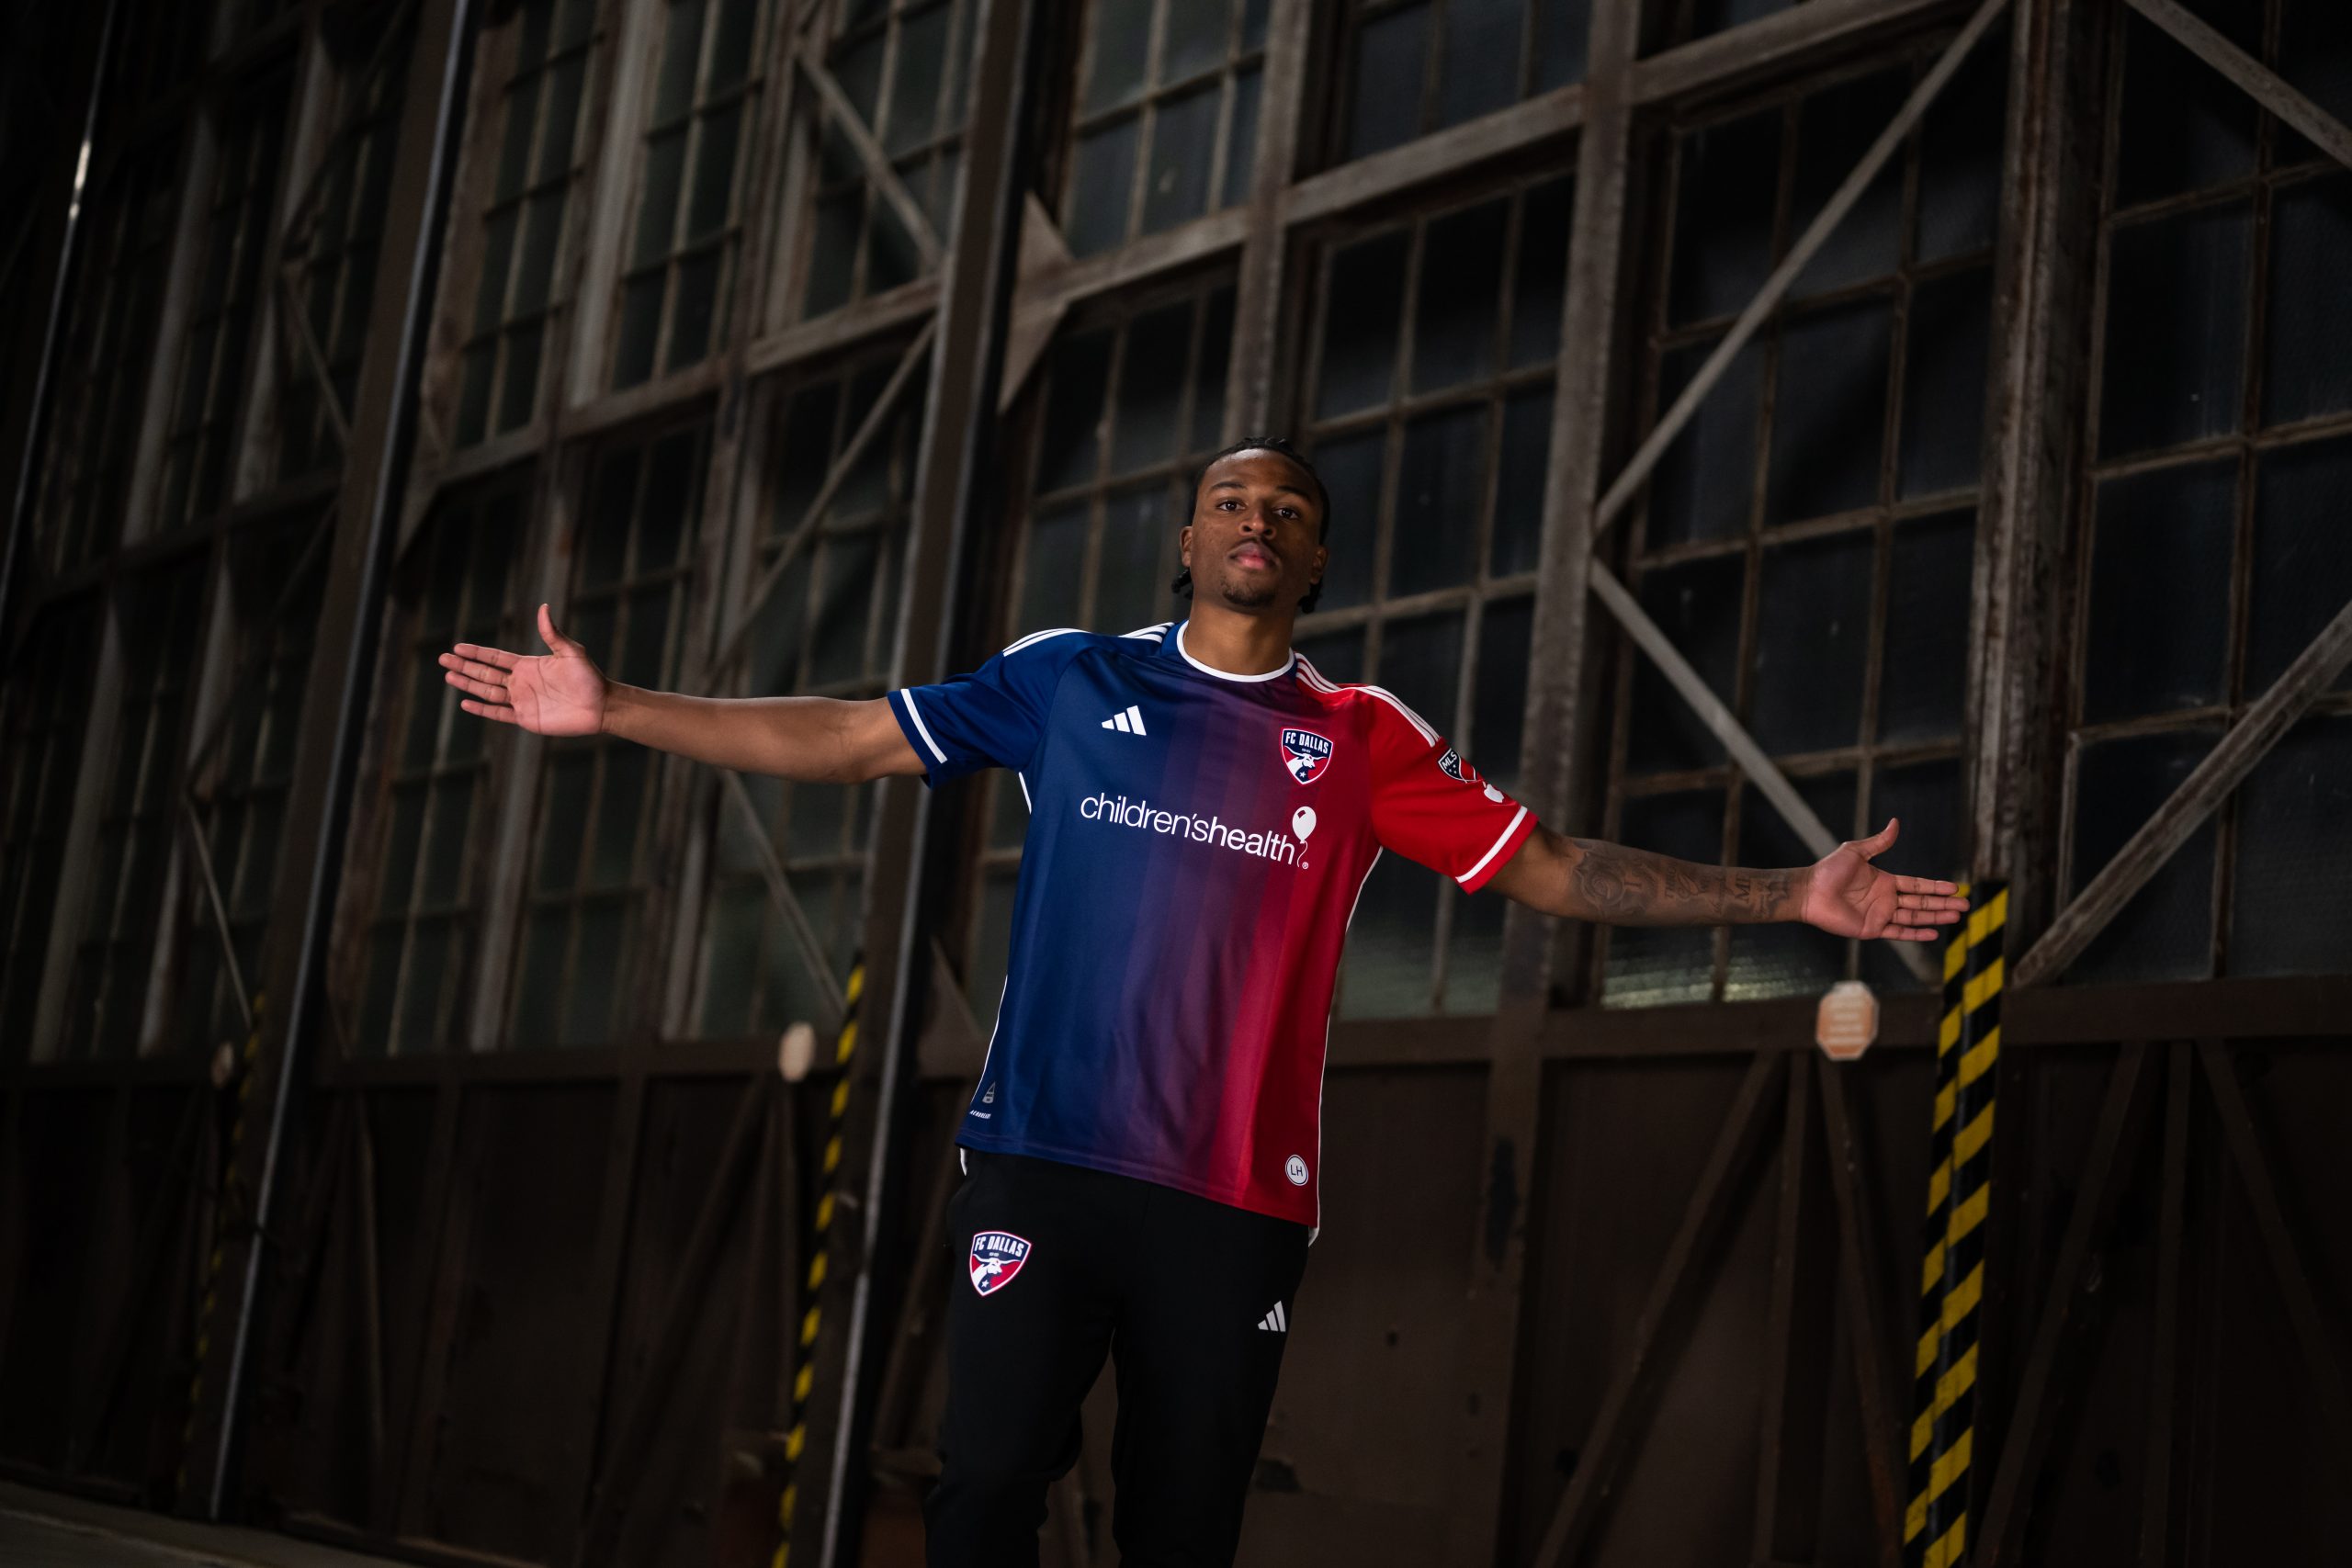 FC Dallas launched its Afterburner kit worn by Dante Sealy. (Courtesy FC Dallas)